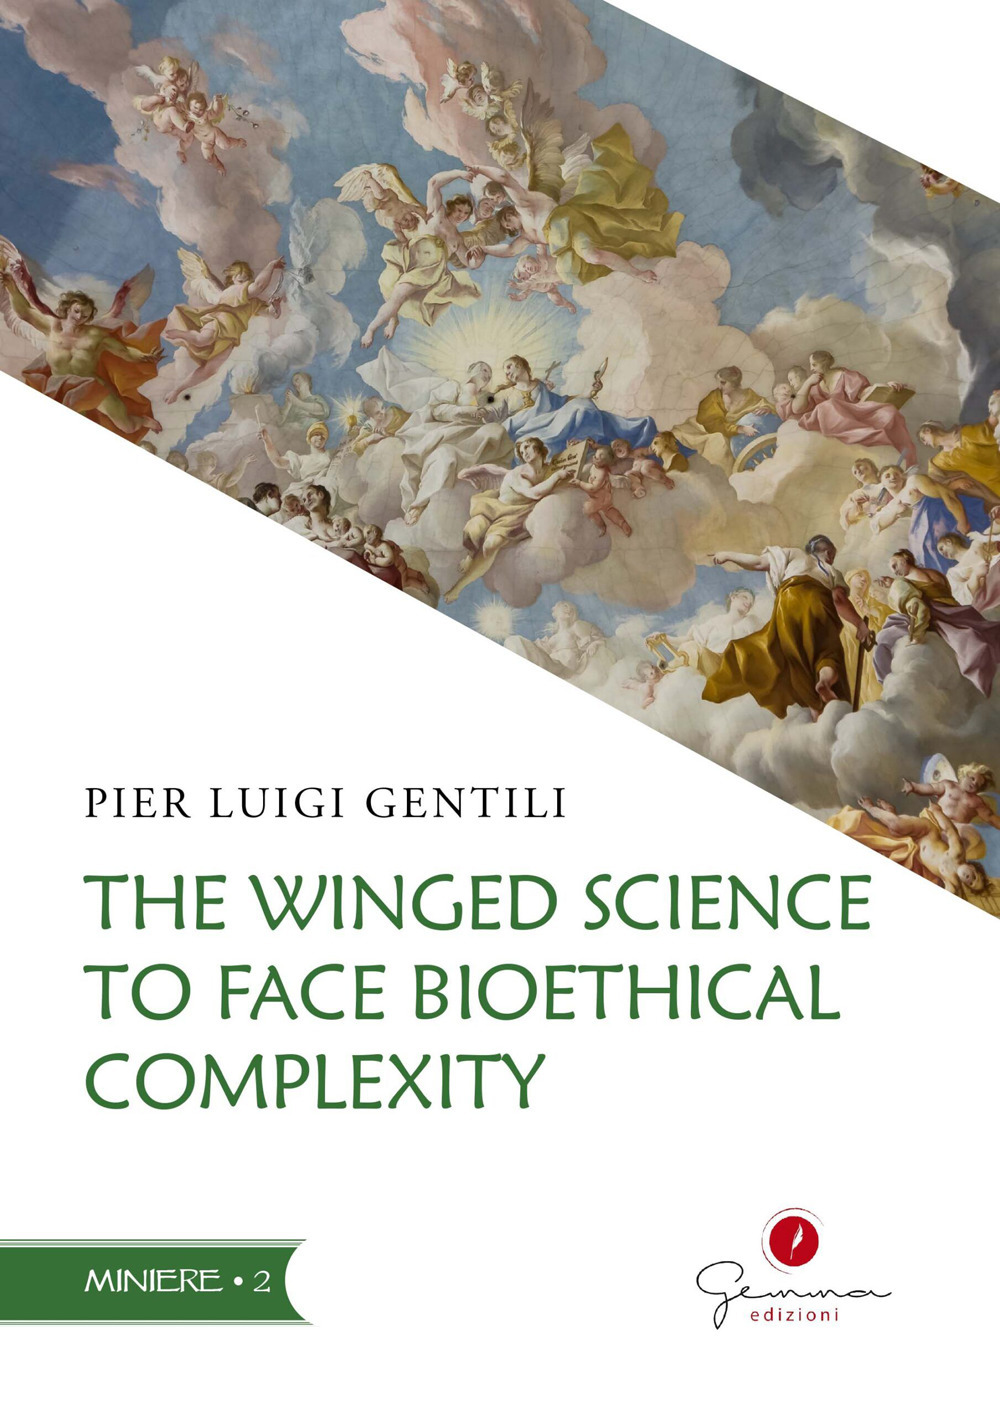 The winged science to face bioethical complexity